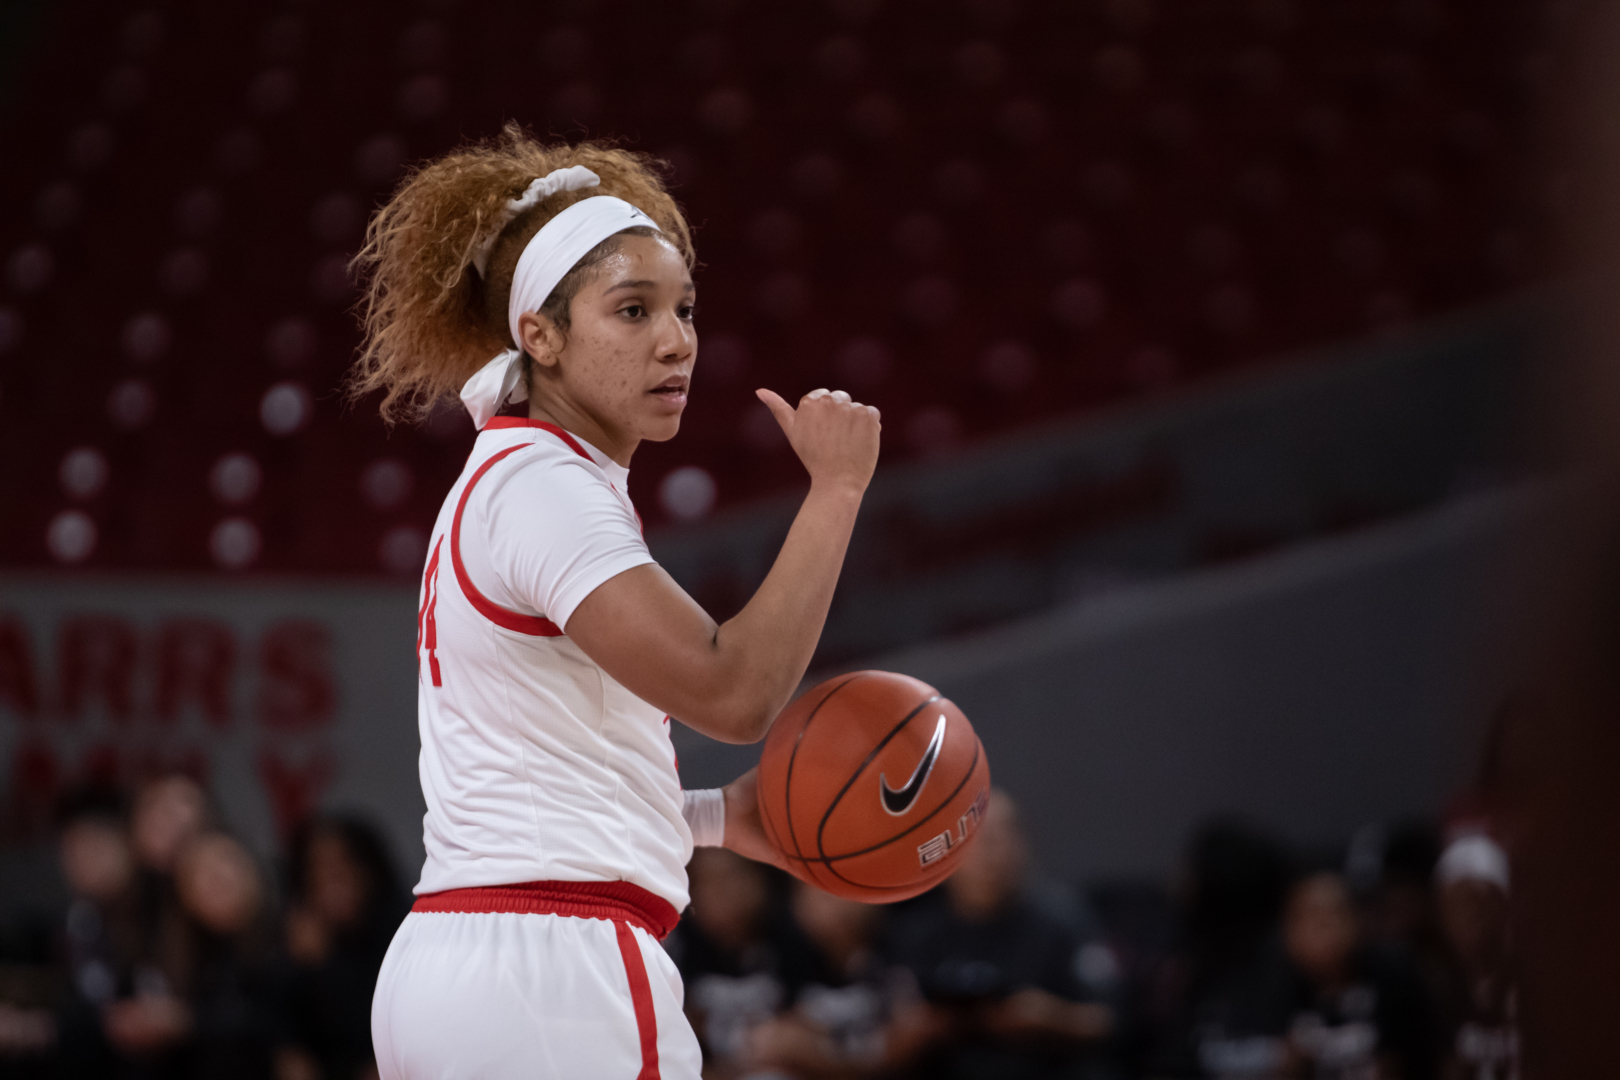 Laila Blair scored a career-high 30 points in UH women's basketball's upset over No. 24 USF on Sunday. | Raphael Fernandez/The Cougar